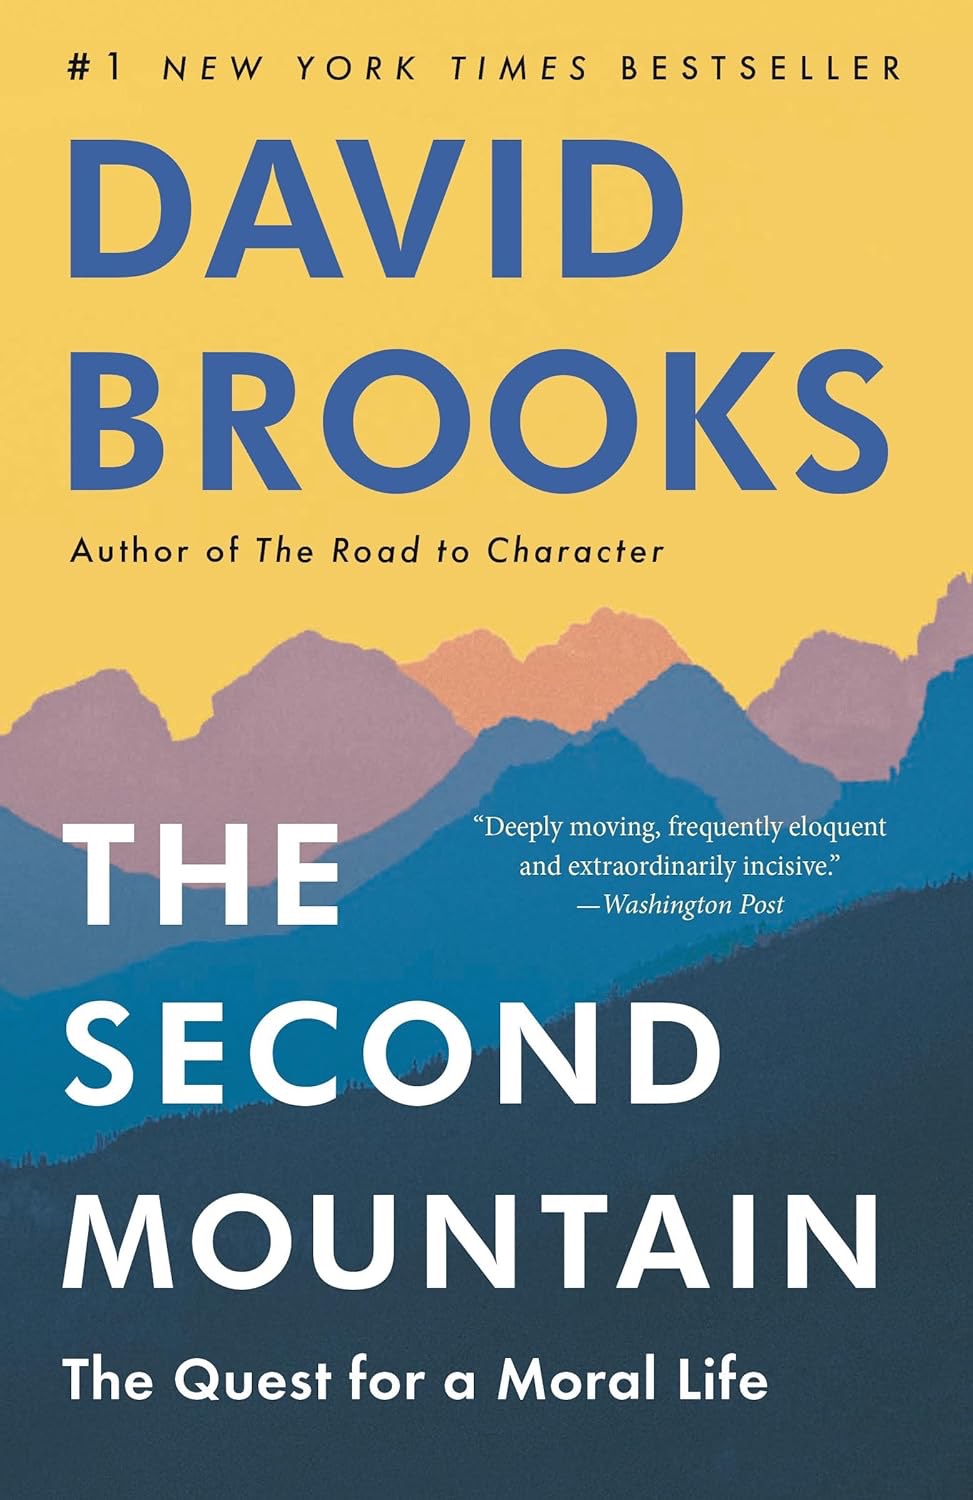 Book cover for David Brooks' The Second Mountain: The Quest for a Moral Life